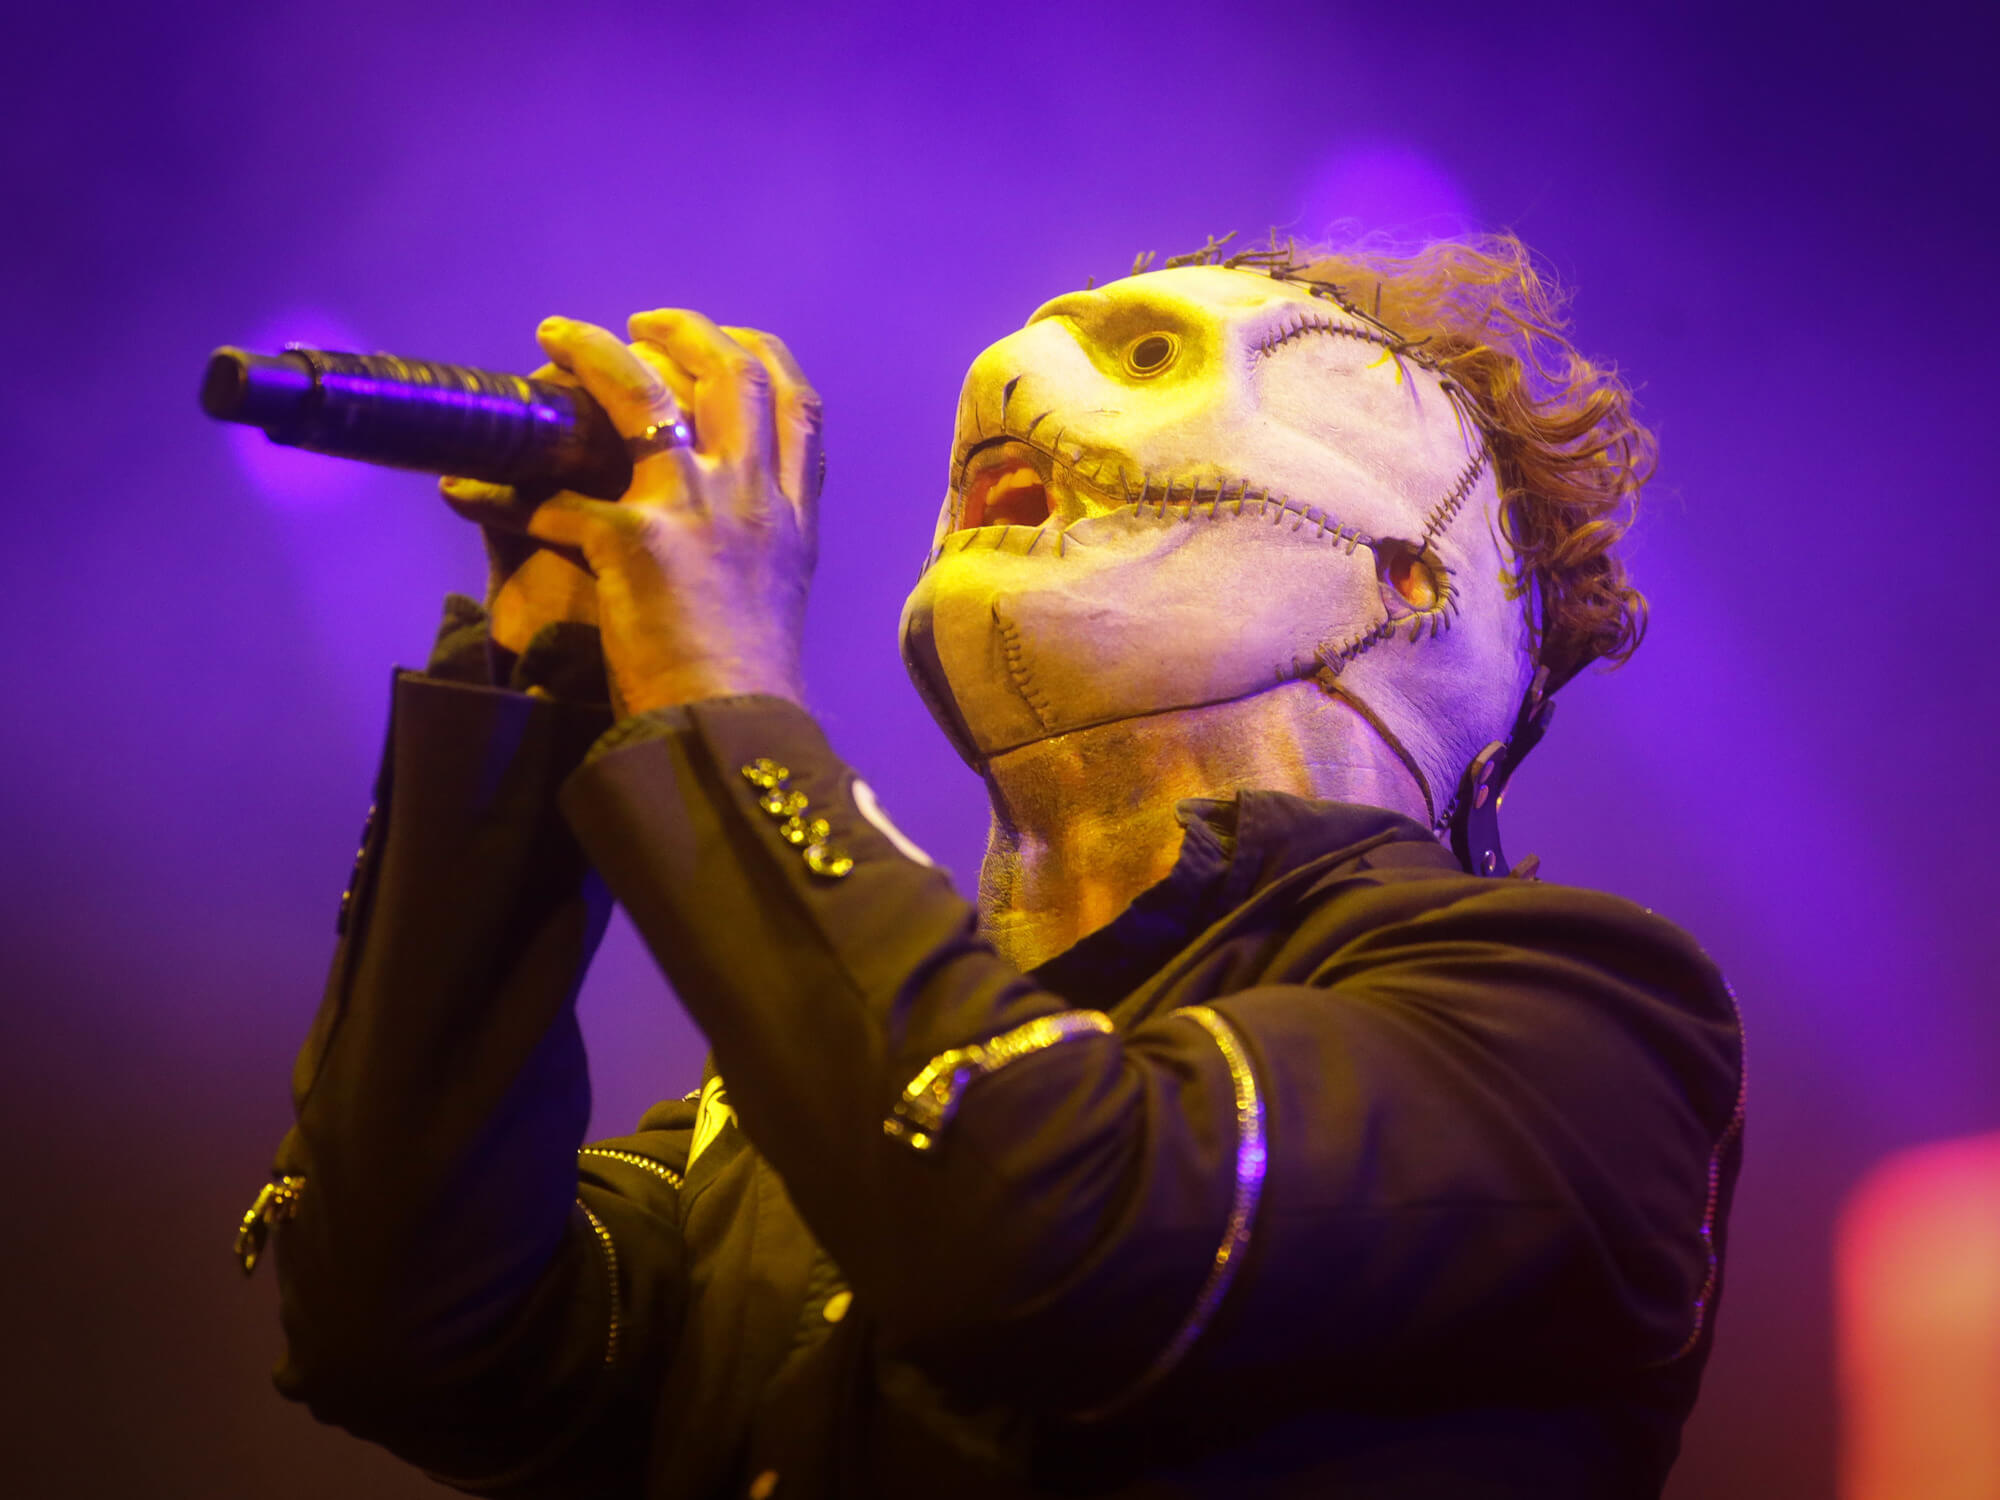 Corey Taylor of Slipknot performing live wearing a mask